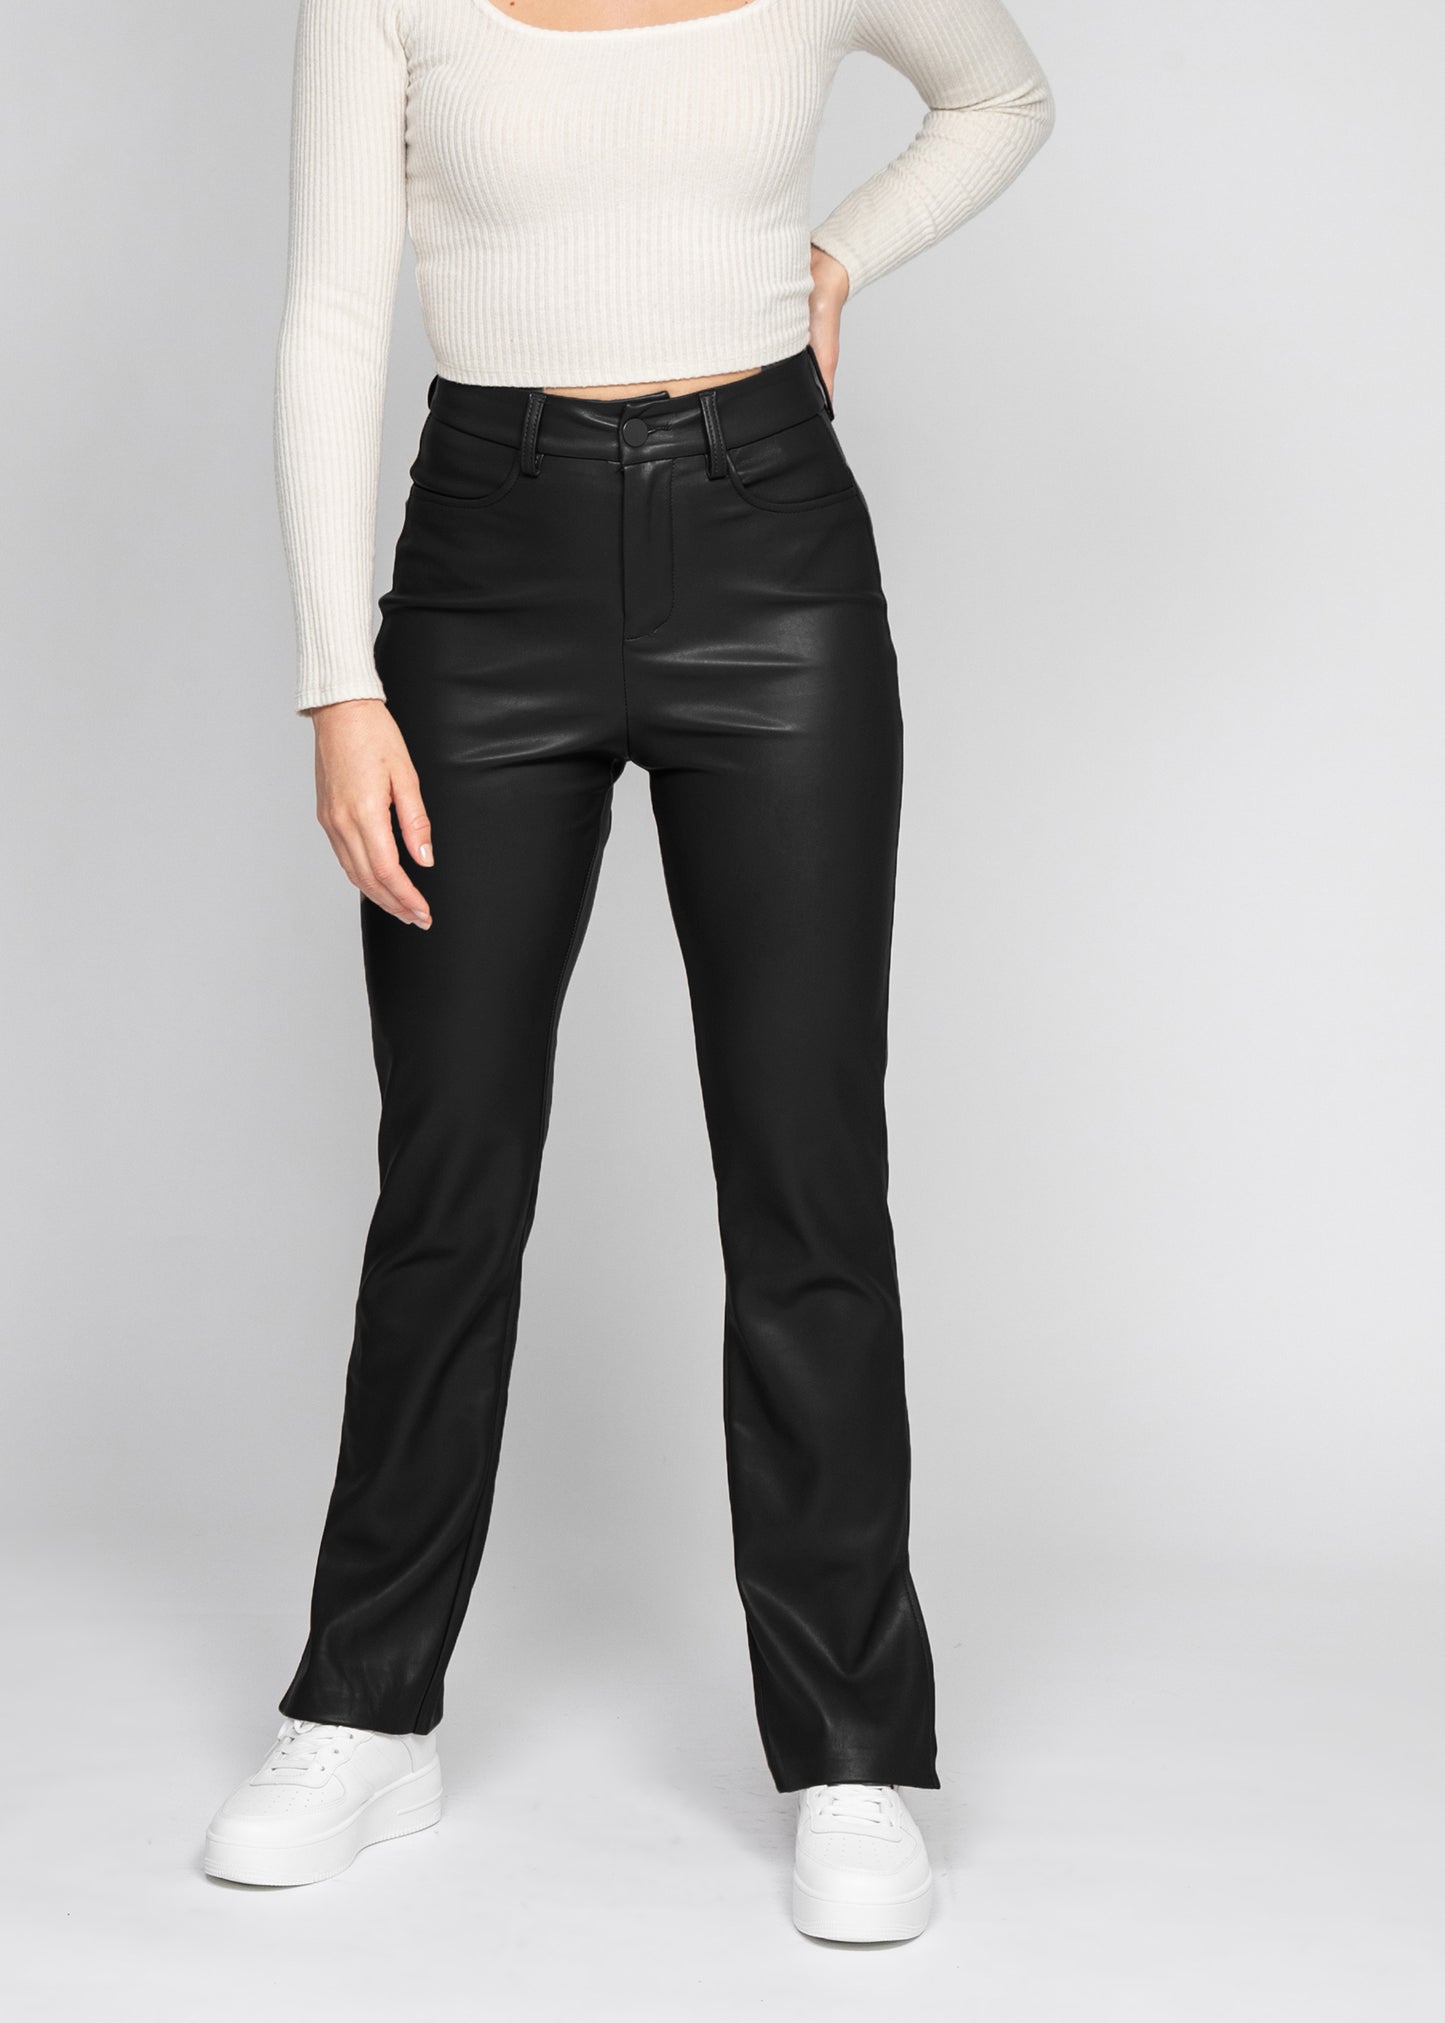 Faux leather trousers with side split in black